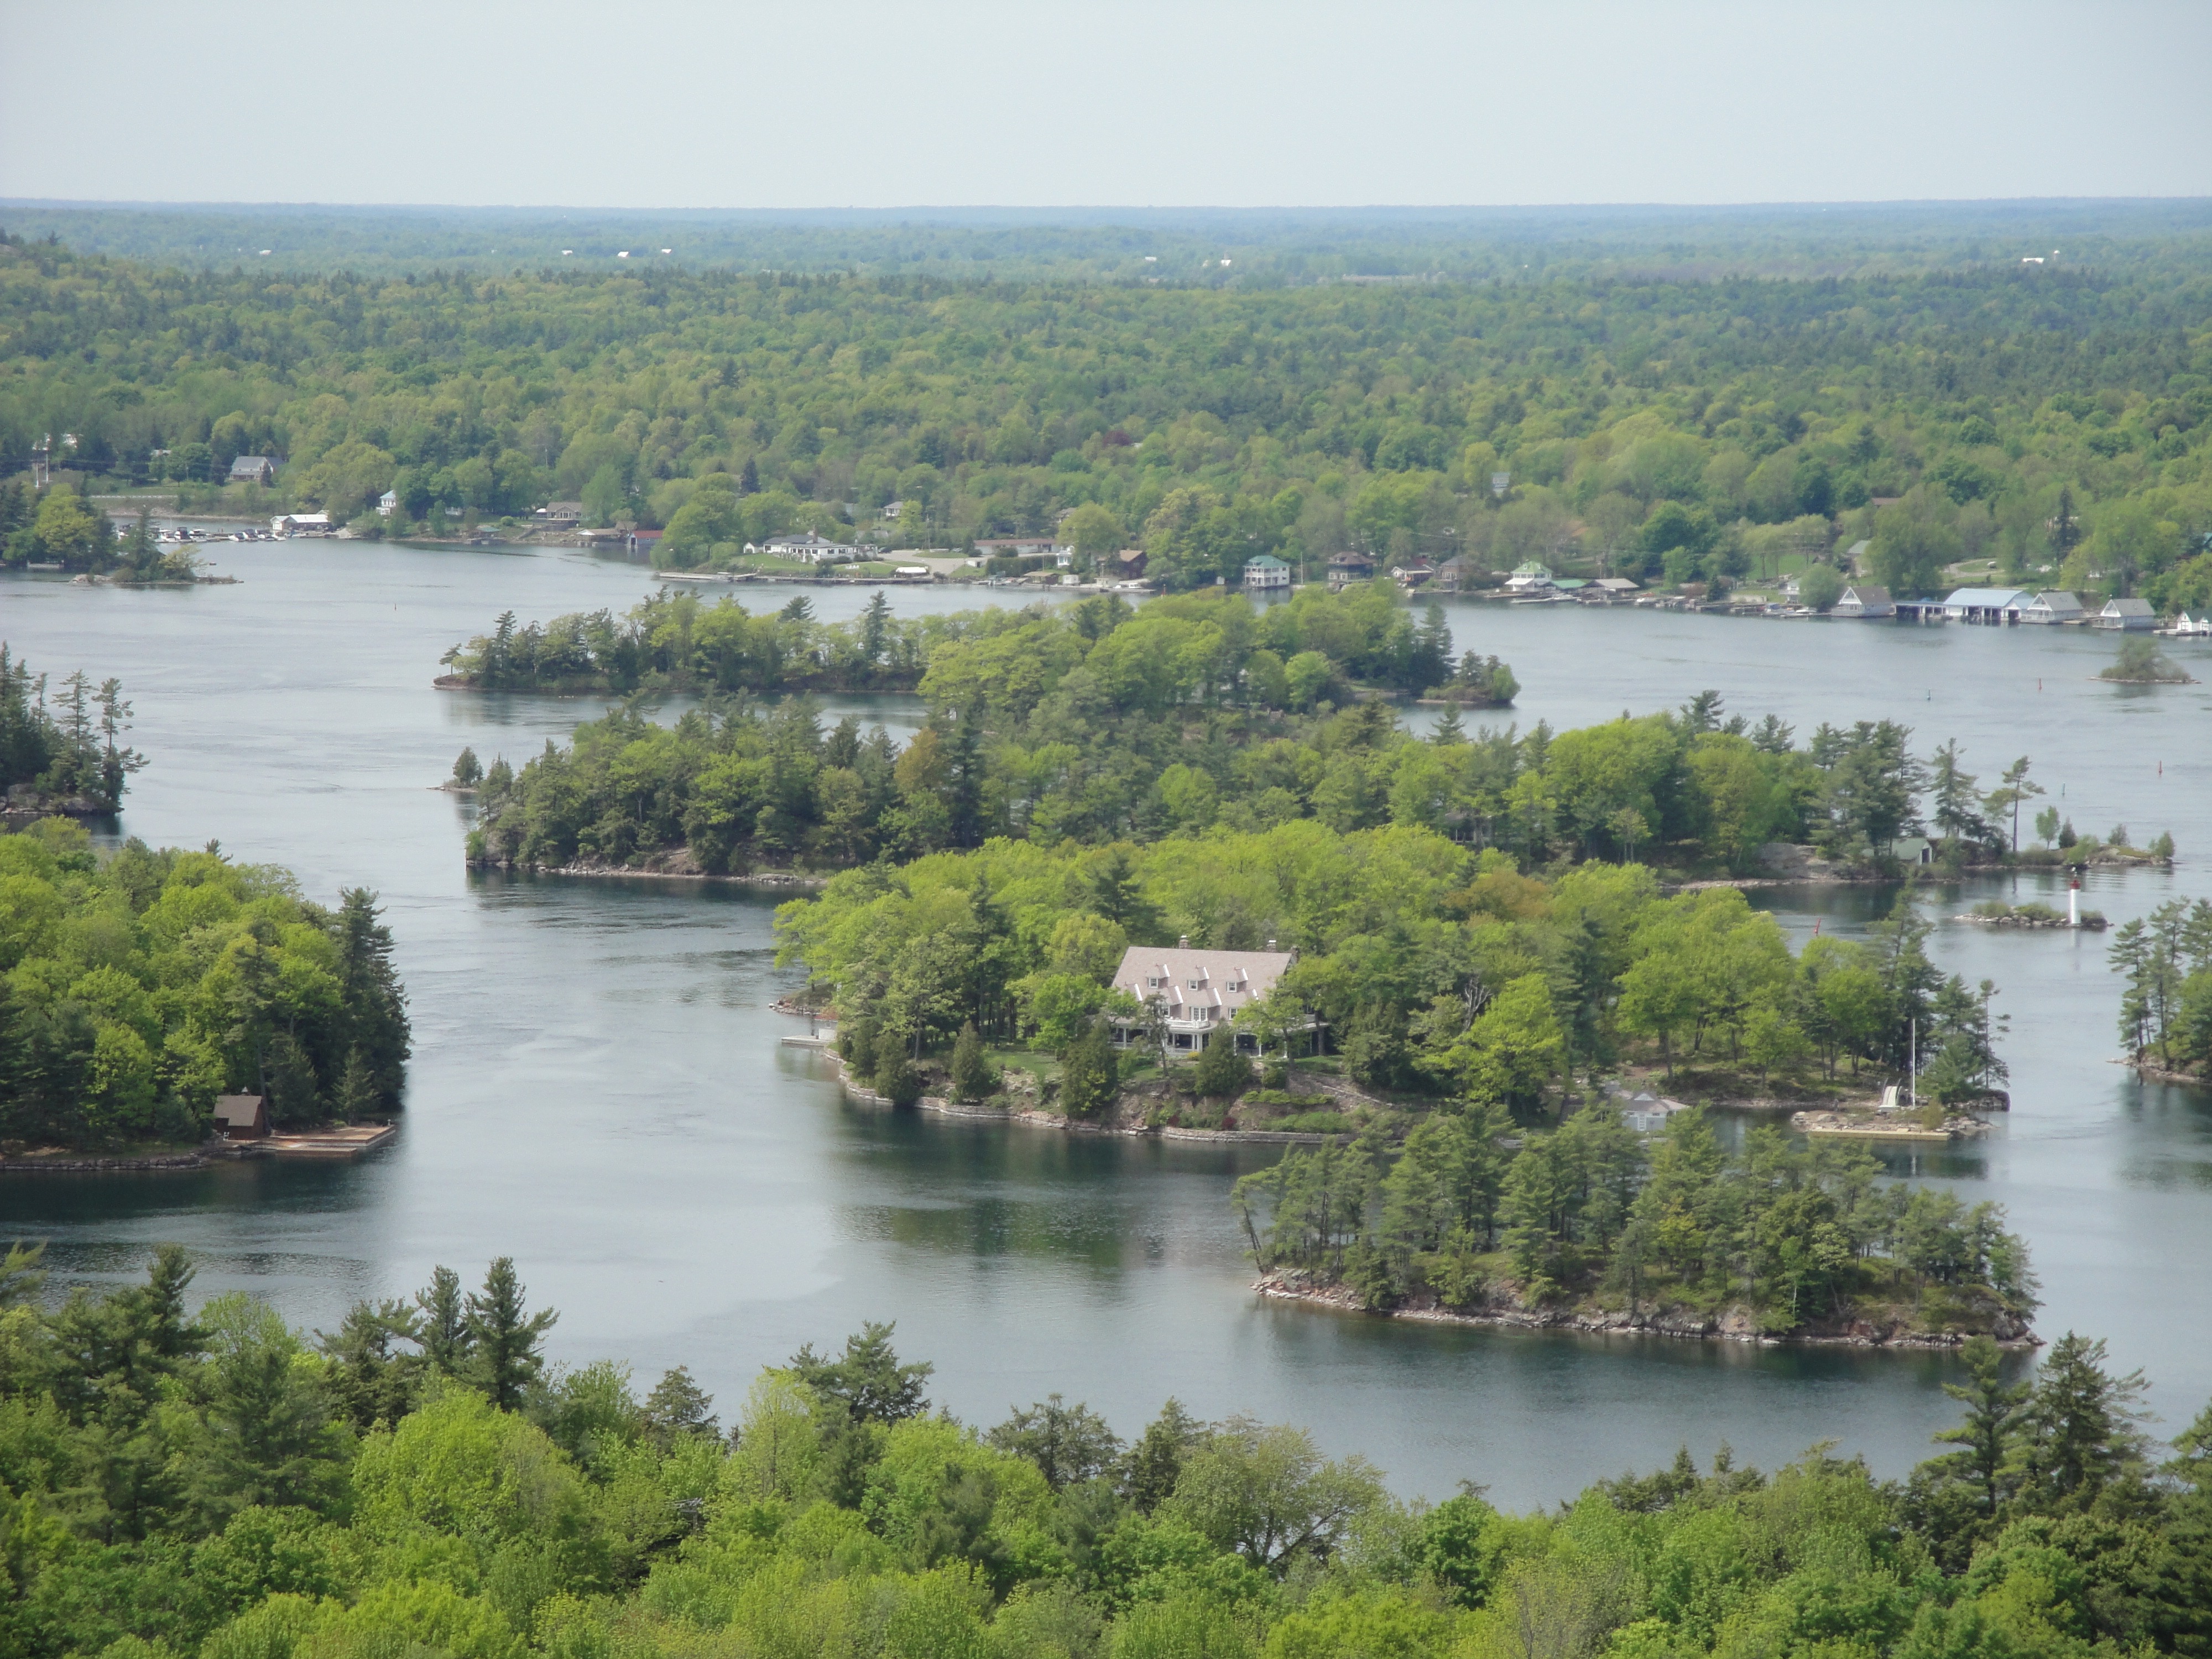 Thousand reasons to go to Thousand Islands for bass fishing